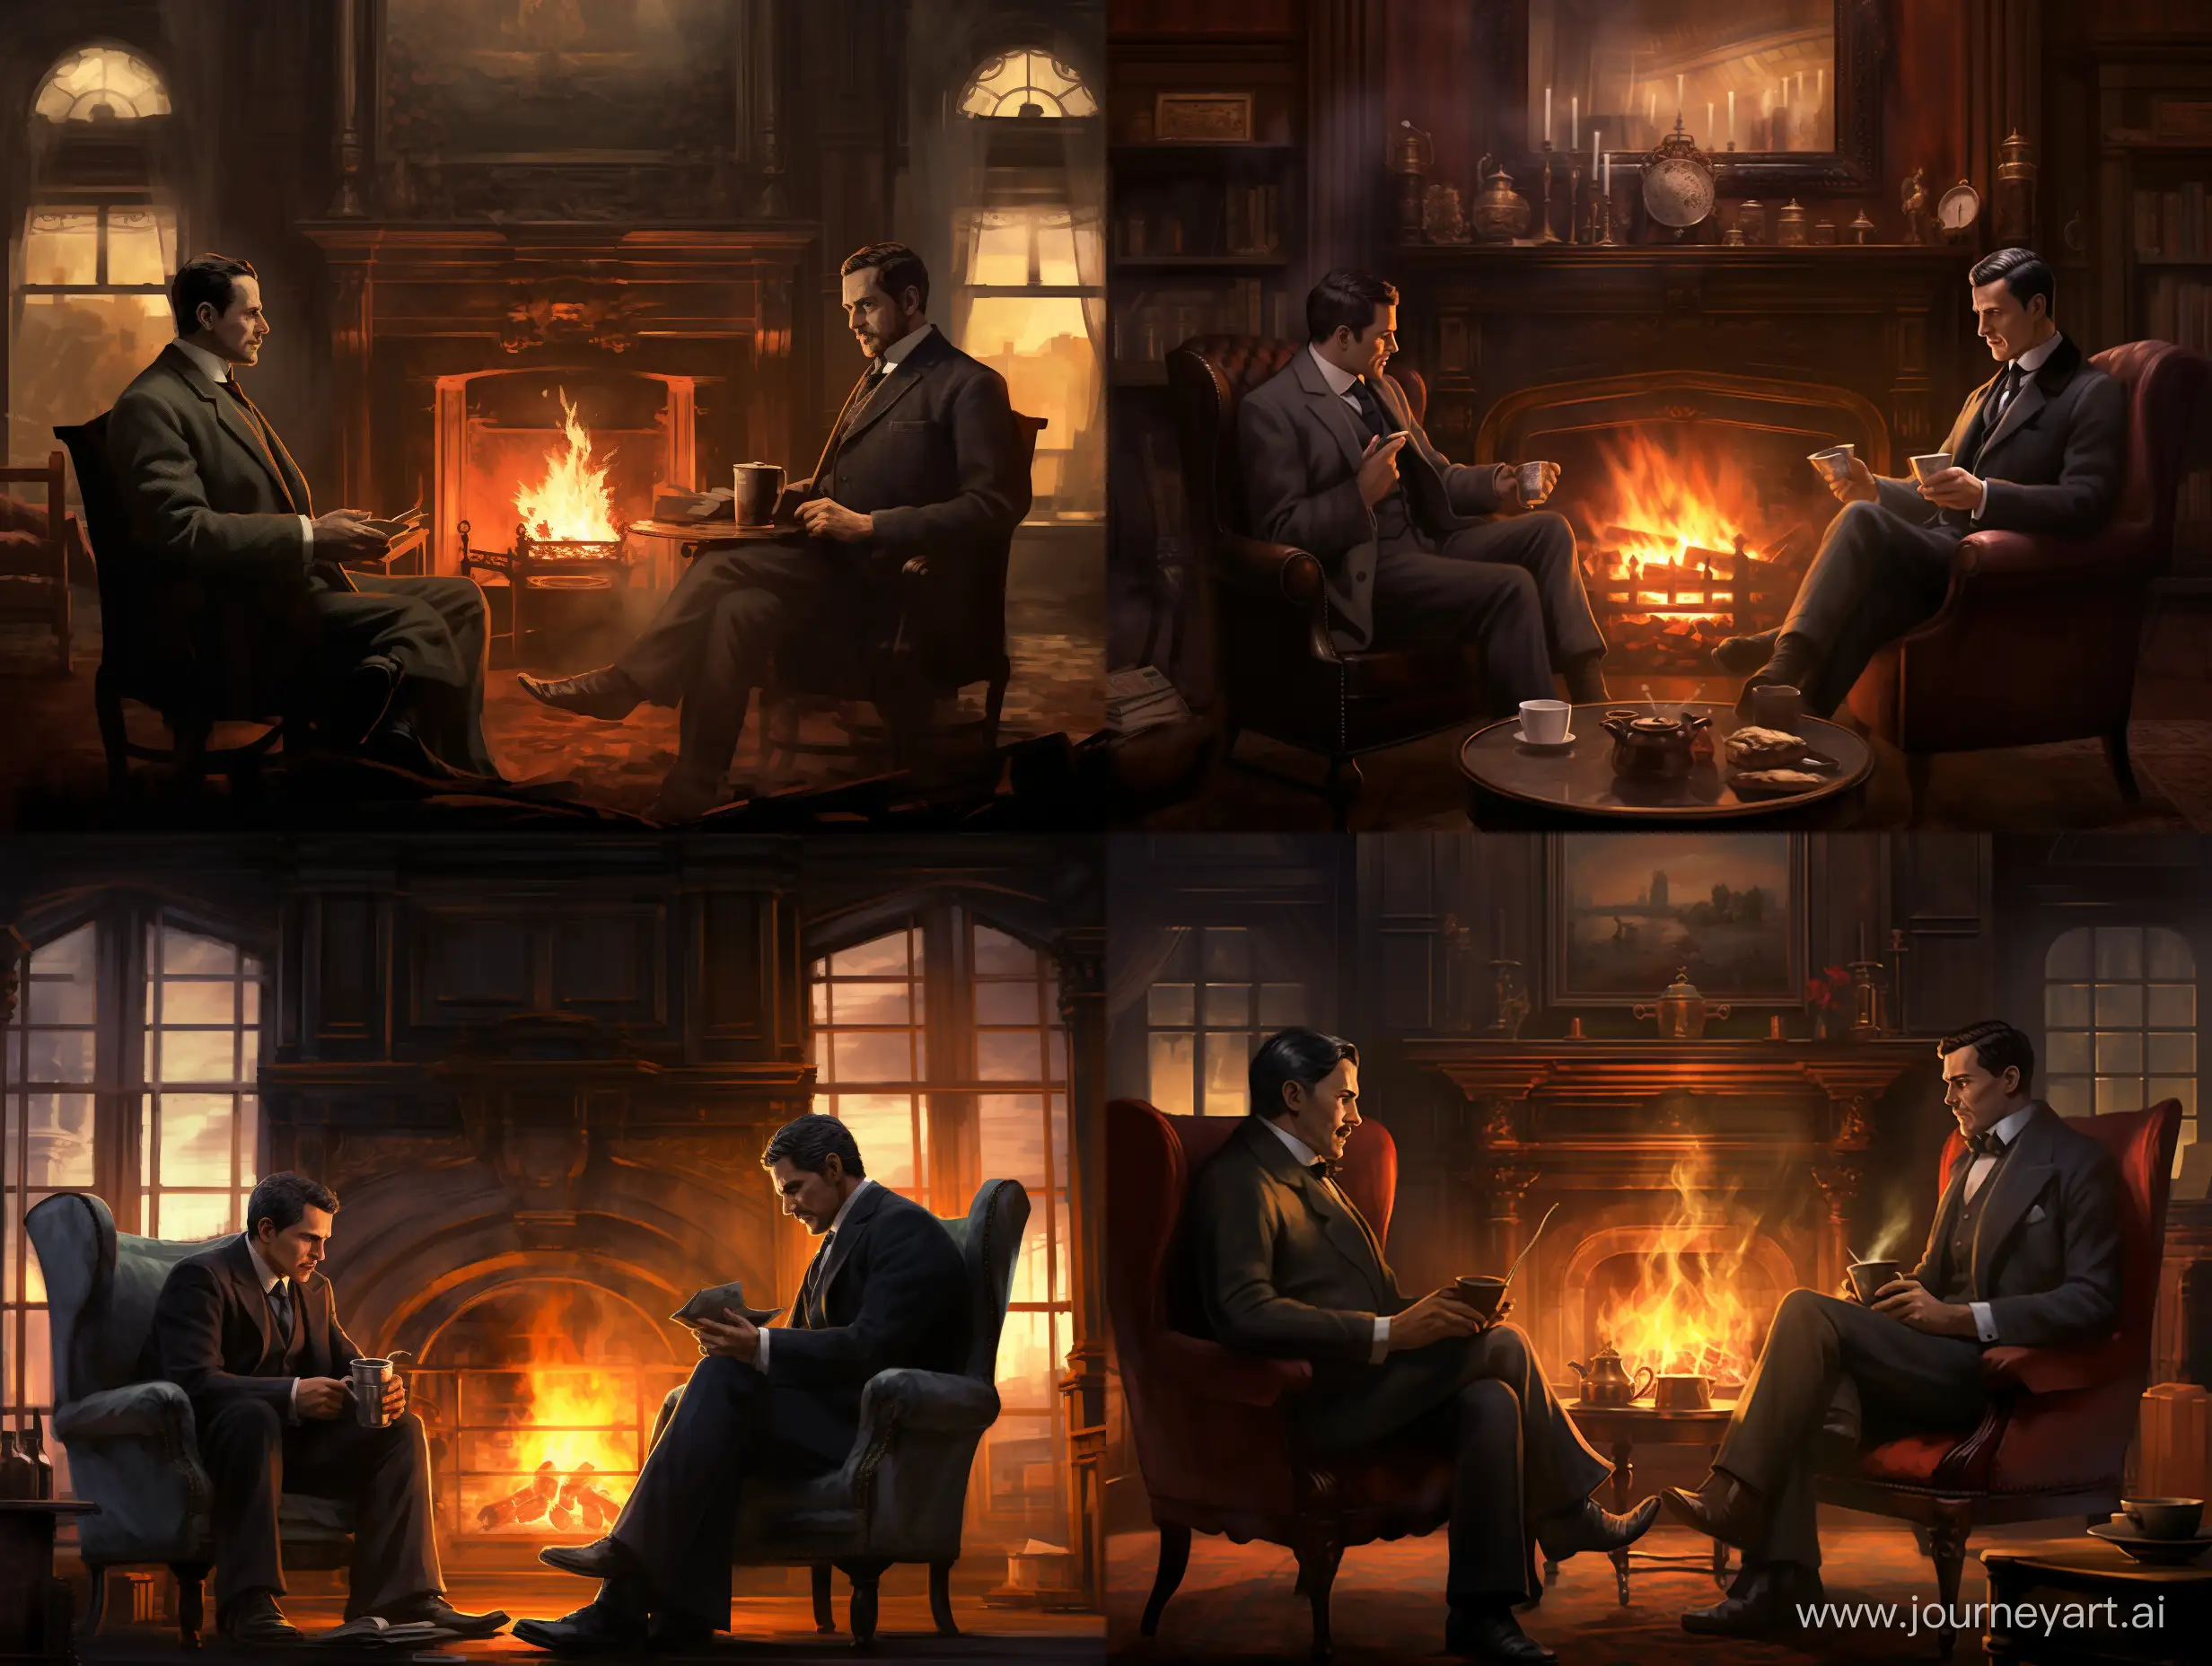 Sherlock Holmes and watson sat on either side of the fireplace in Holmes’ lodging at Baker Street In London in a chilly early spring morning. They were drinking coffee and chatting with each other.